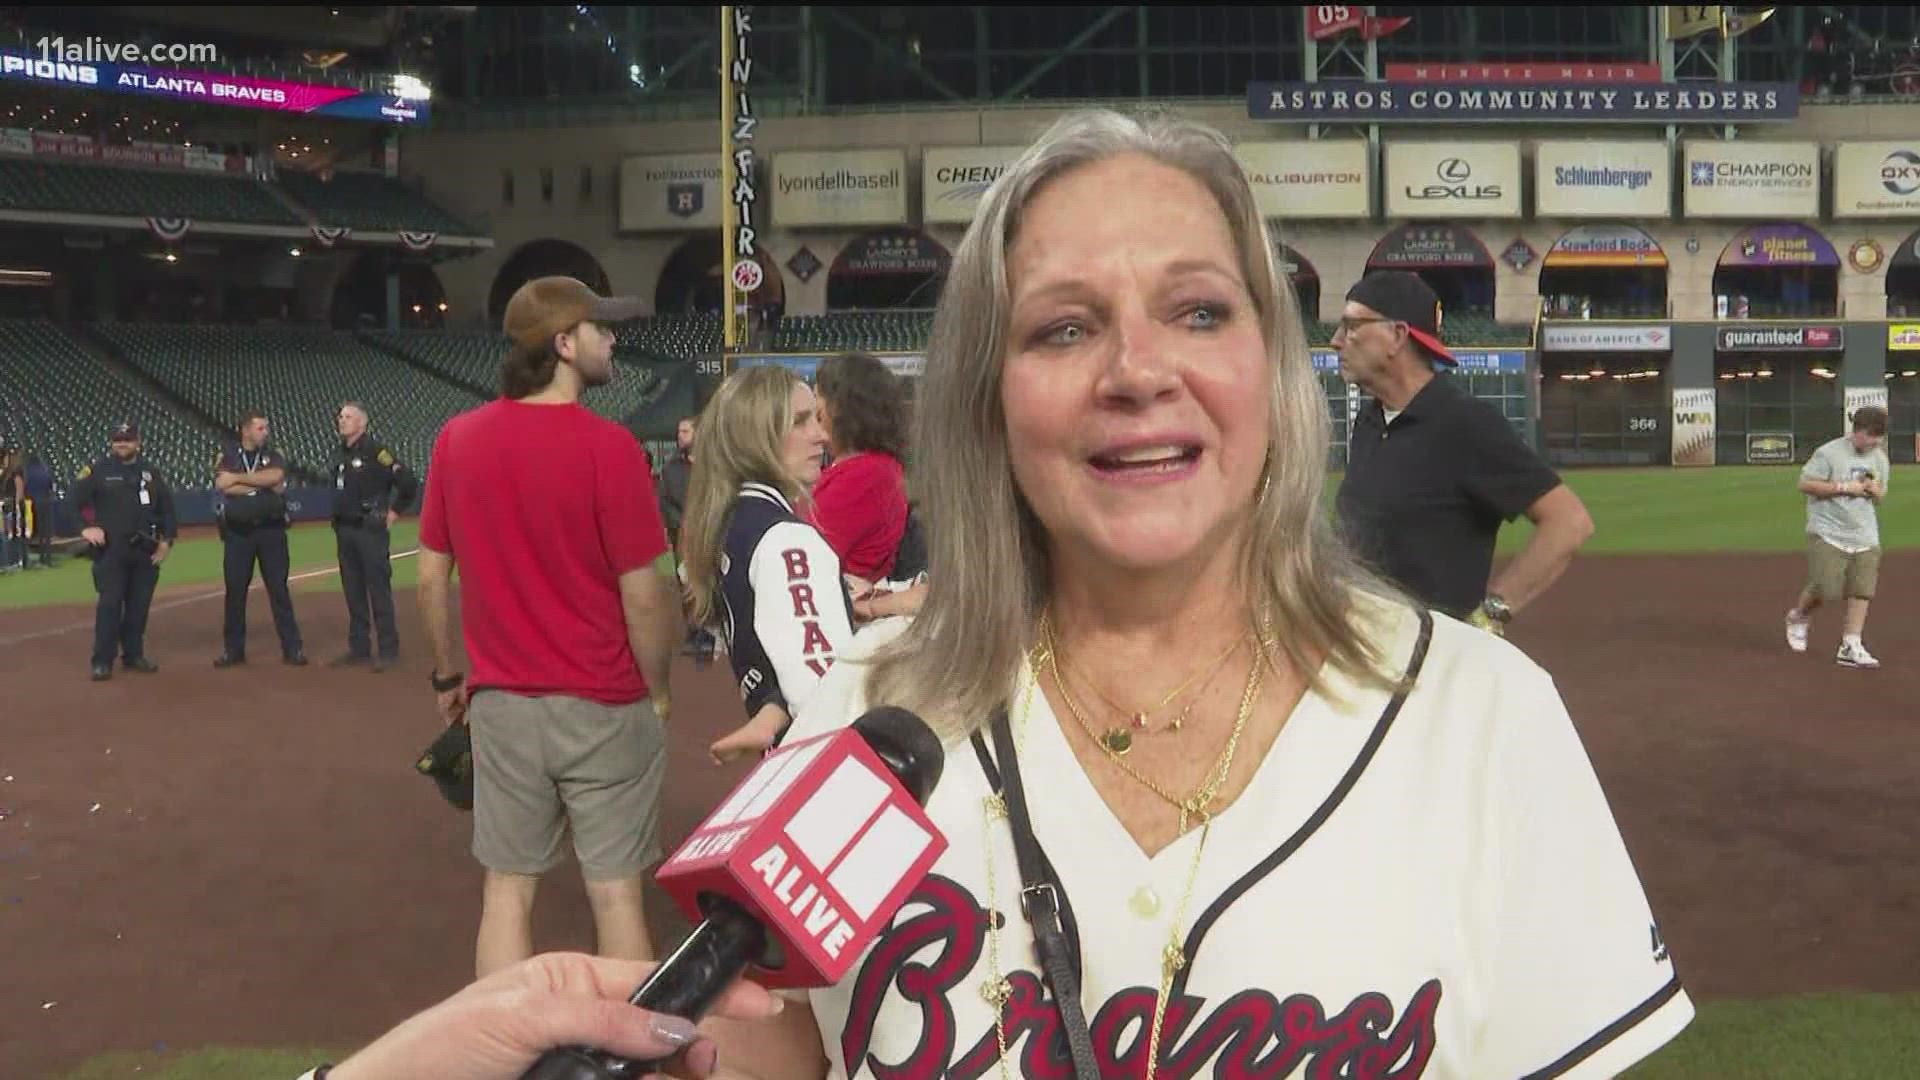 Ronnie Snitker is married to Braves manager Brian Snitker and spoke about what it's been like sticking by the game through the years.